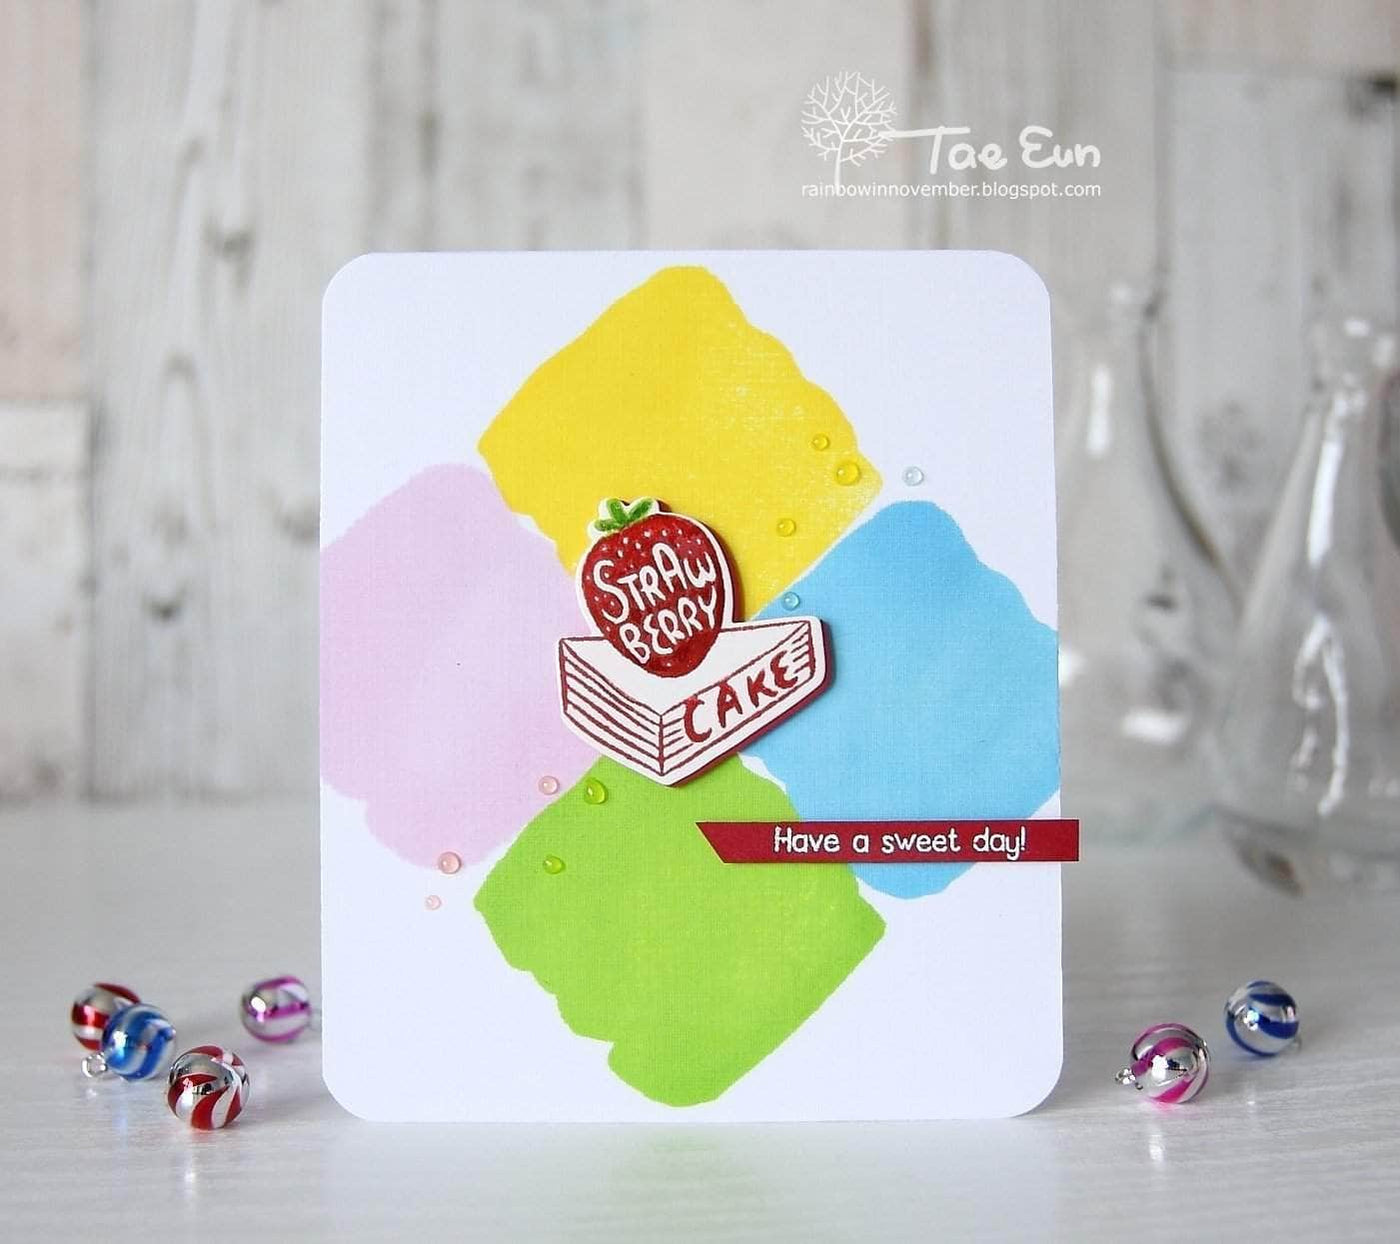 Photocentric Clear Stamps Watercolor Frames Stamp Set